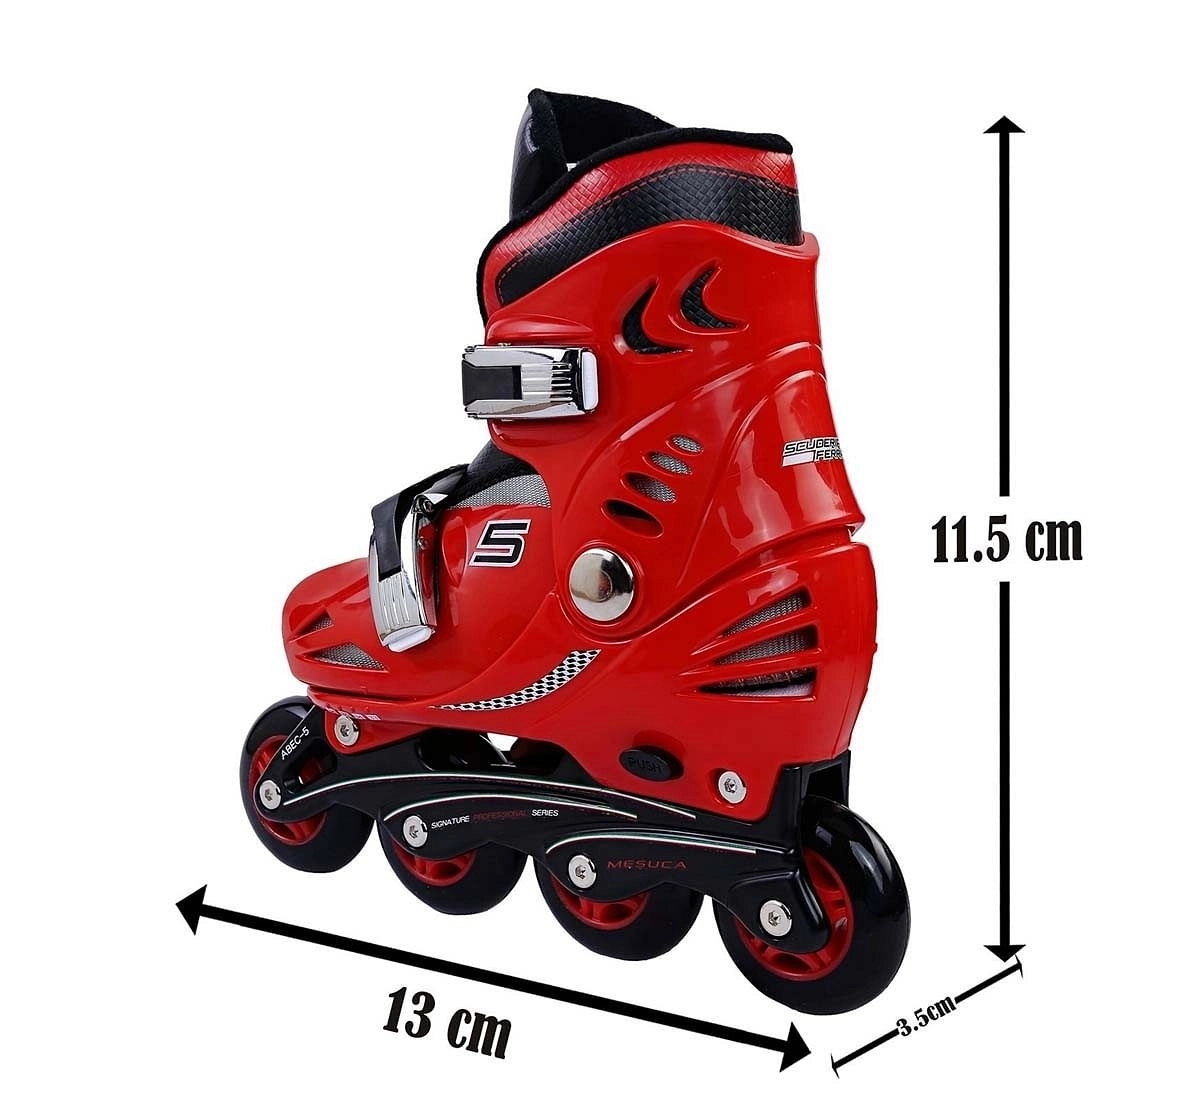 Ferrari Kids Skate Combo Set, 29-32 And 33-36 Skates and Skateboards for Kids age 13Y+ (Red)